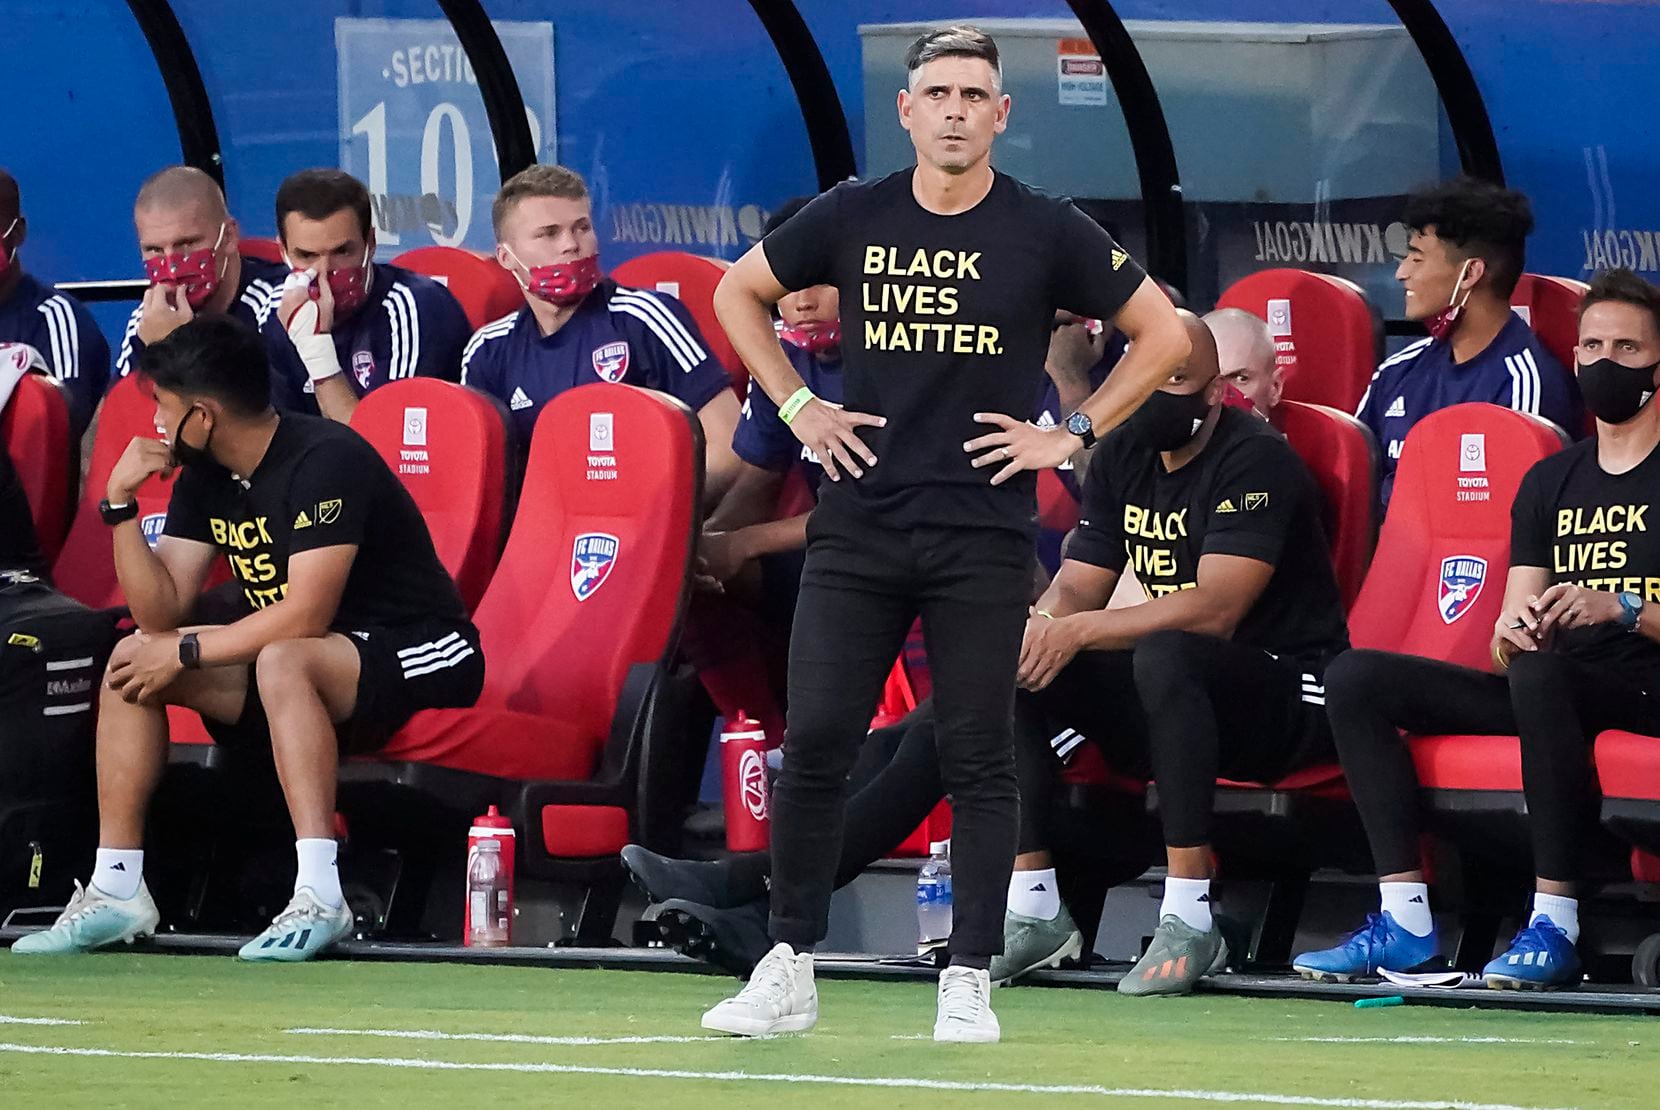 FC Dallas head coach Luchi Gonzalez wears a Black Live Matter t-shirt on the bench during the first half of an MLS soccer game against Nashville SC at Toyota Stadium on Wednesday, Aug. 12, 2020, in Frisco, Texas. (Smiley N. Pool/The Dallas Morning News)